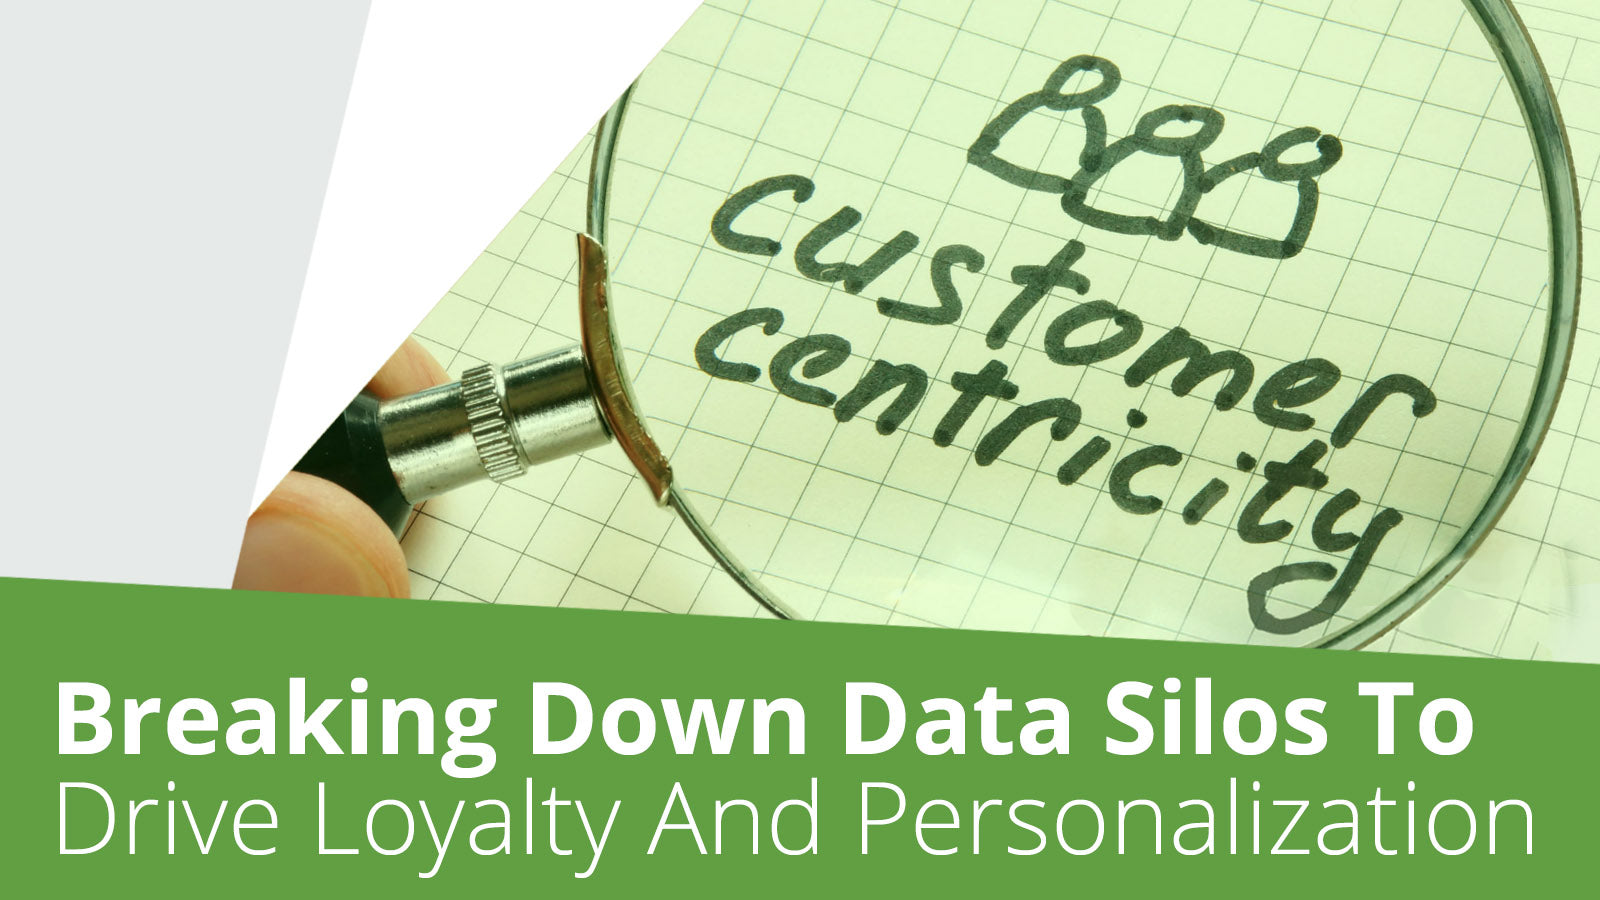 Break Down Data Silos To Drive Personalization and Loyalty